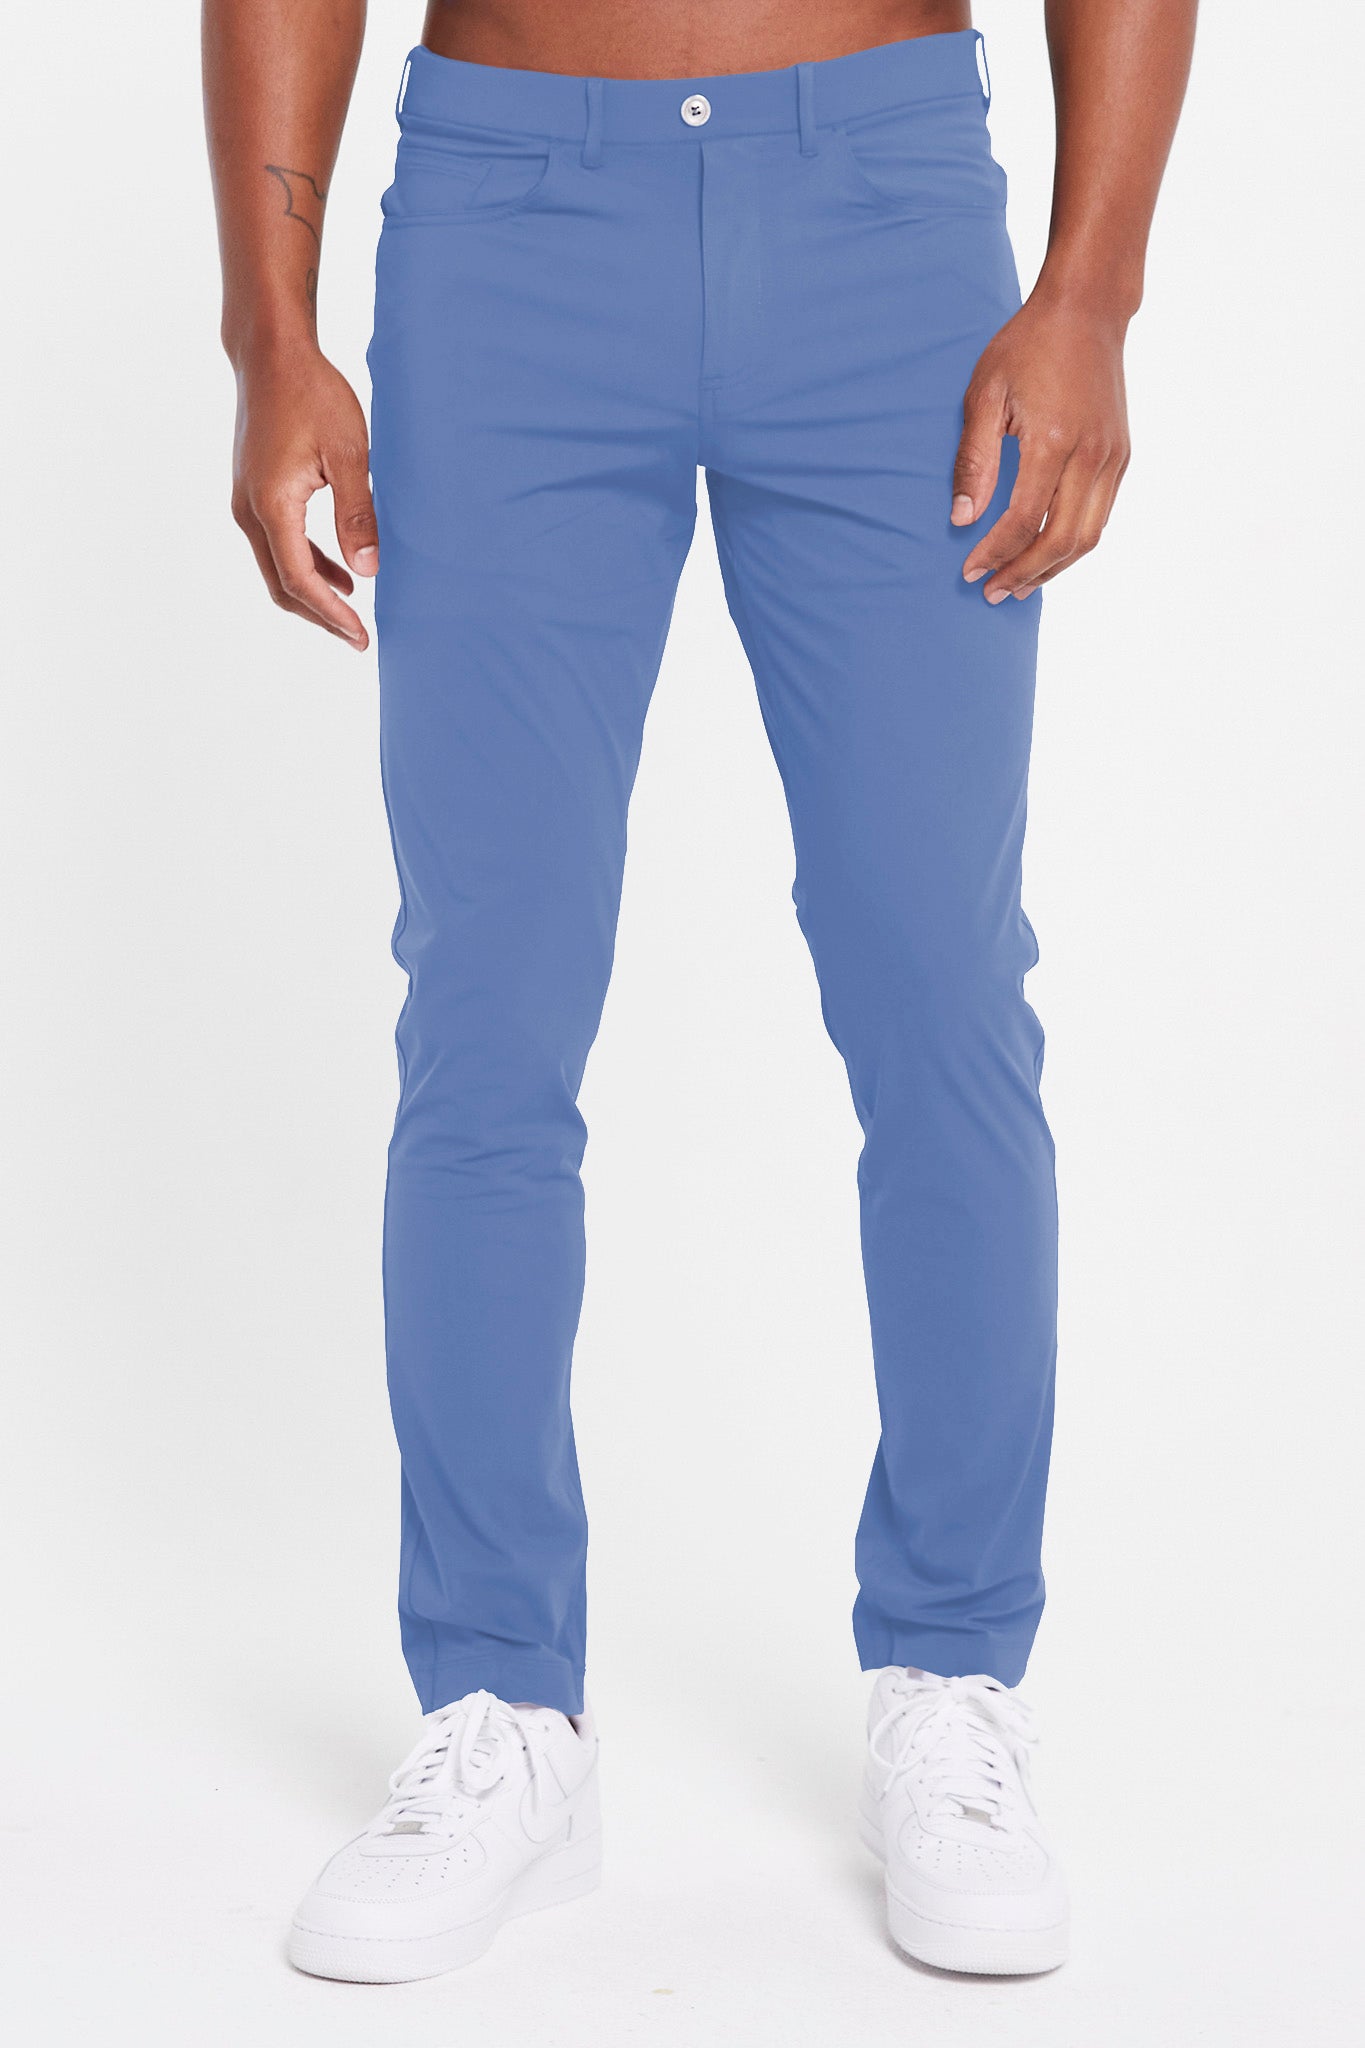 Image of the kent pull-on trouser in blue horizon 1